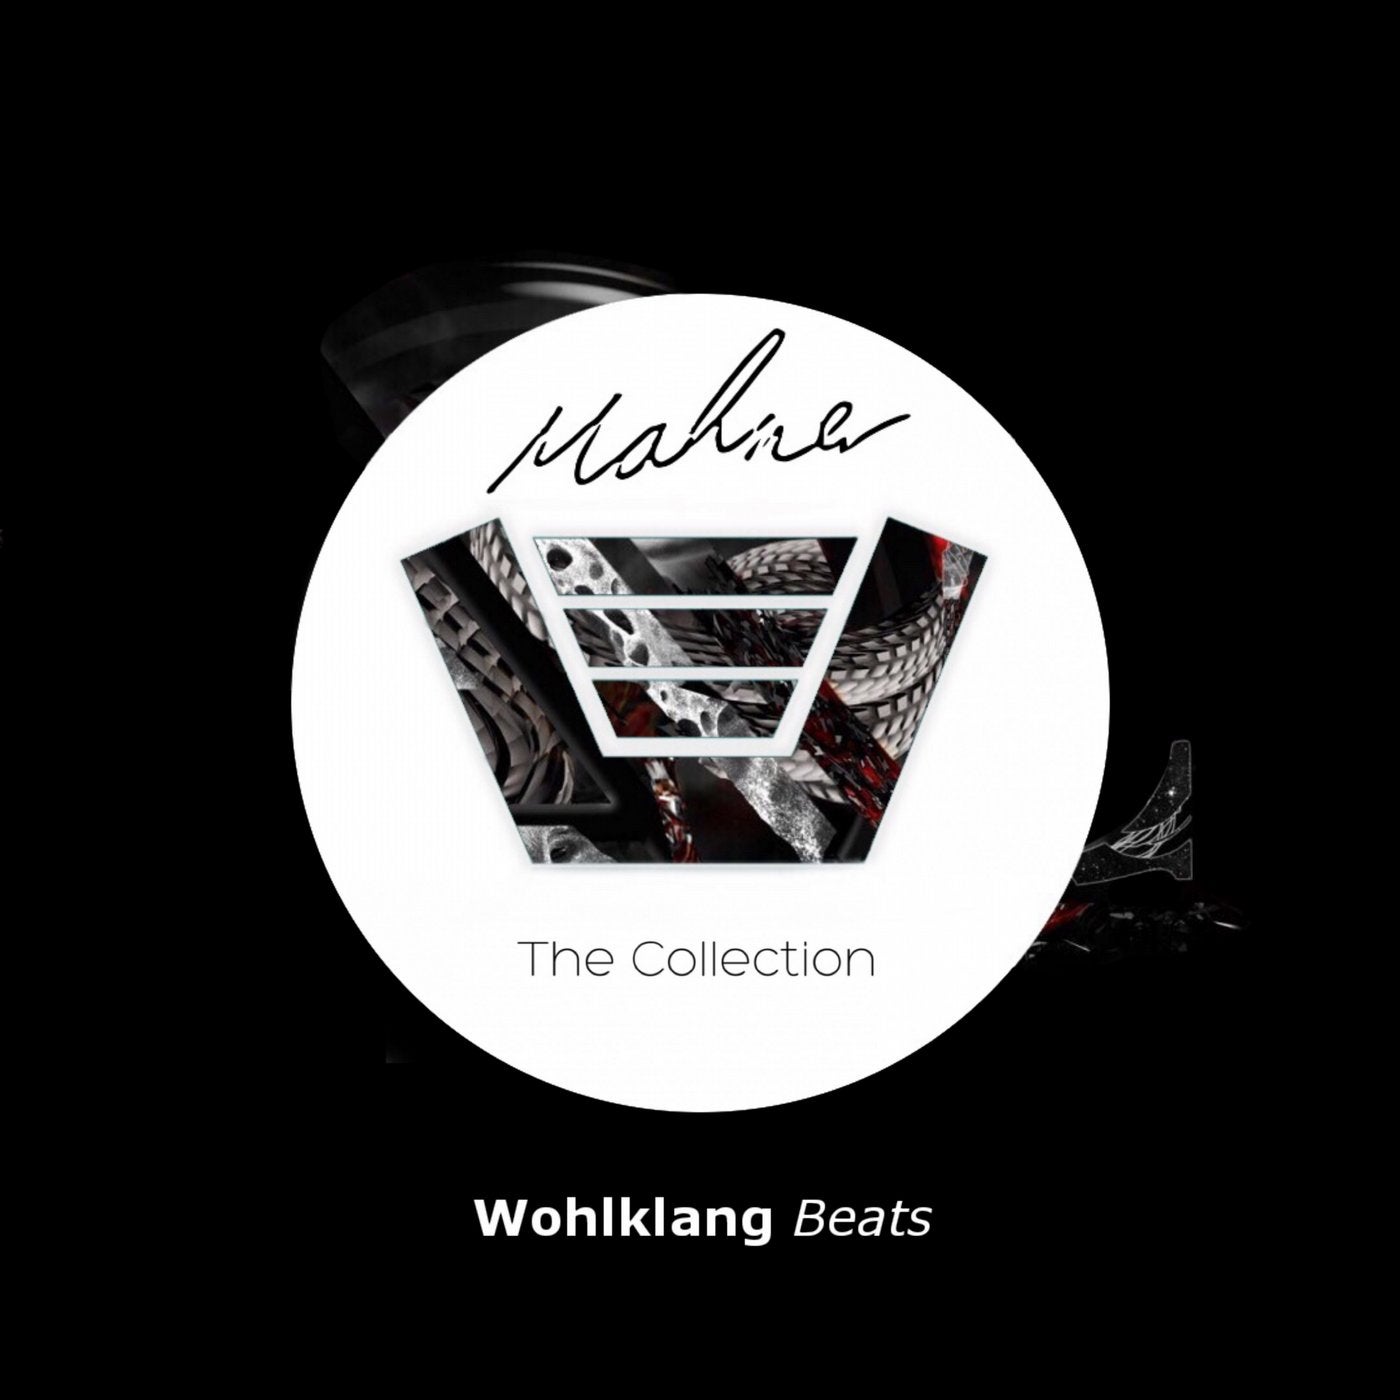 Wohlklang Beats - The Collection